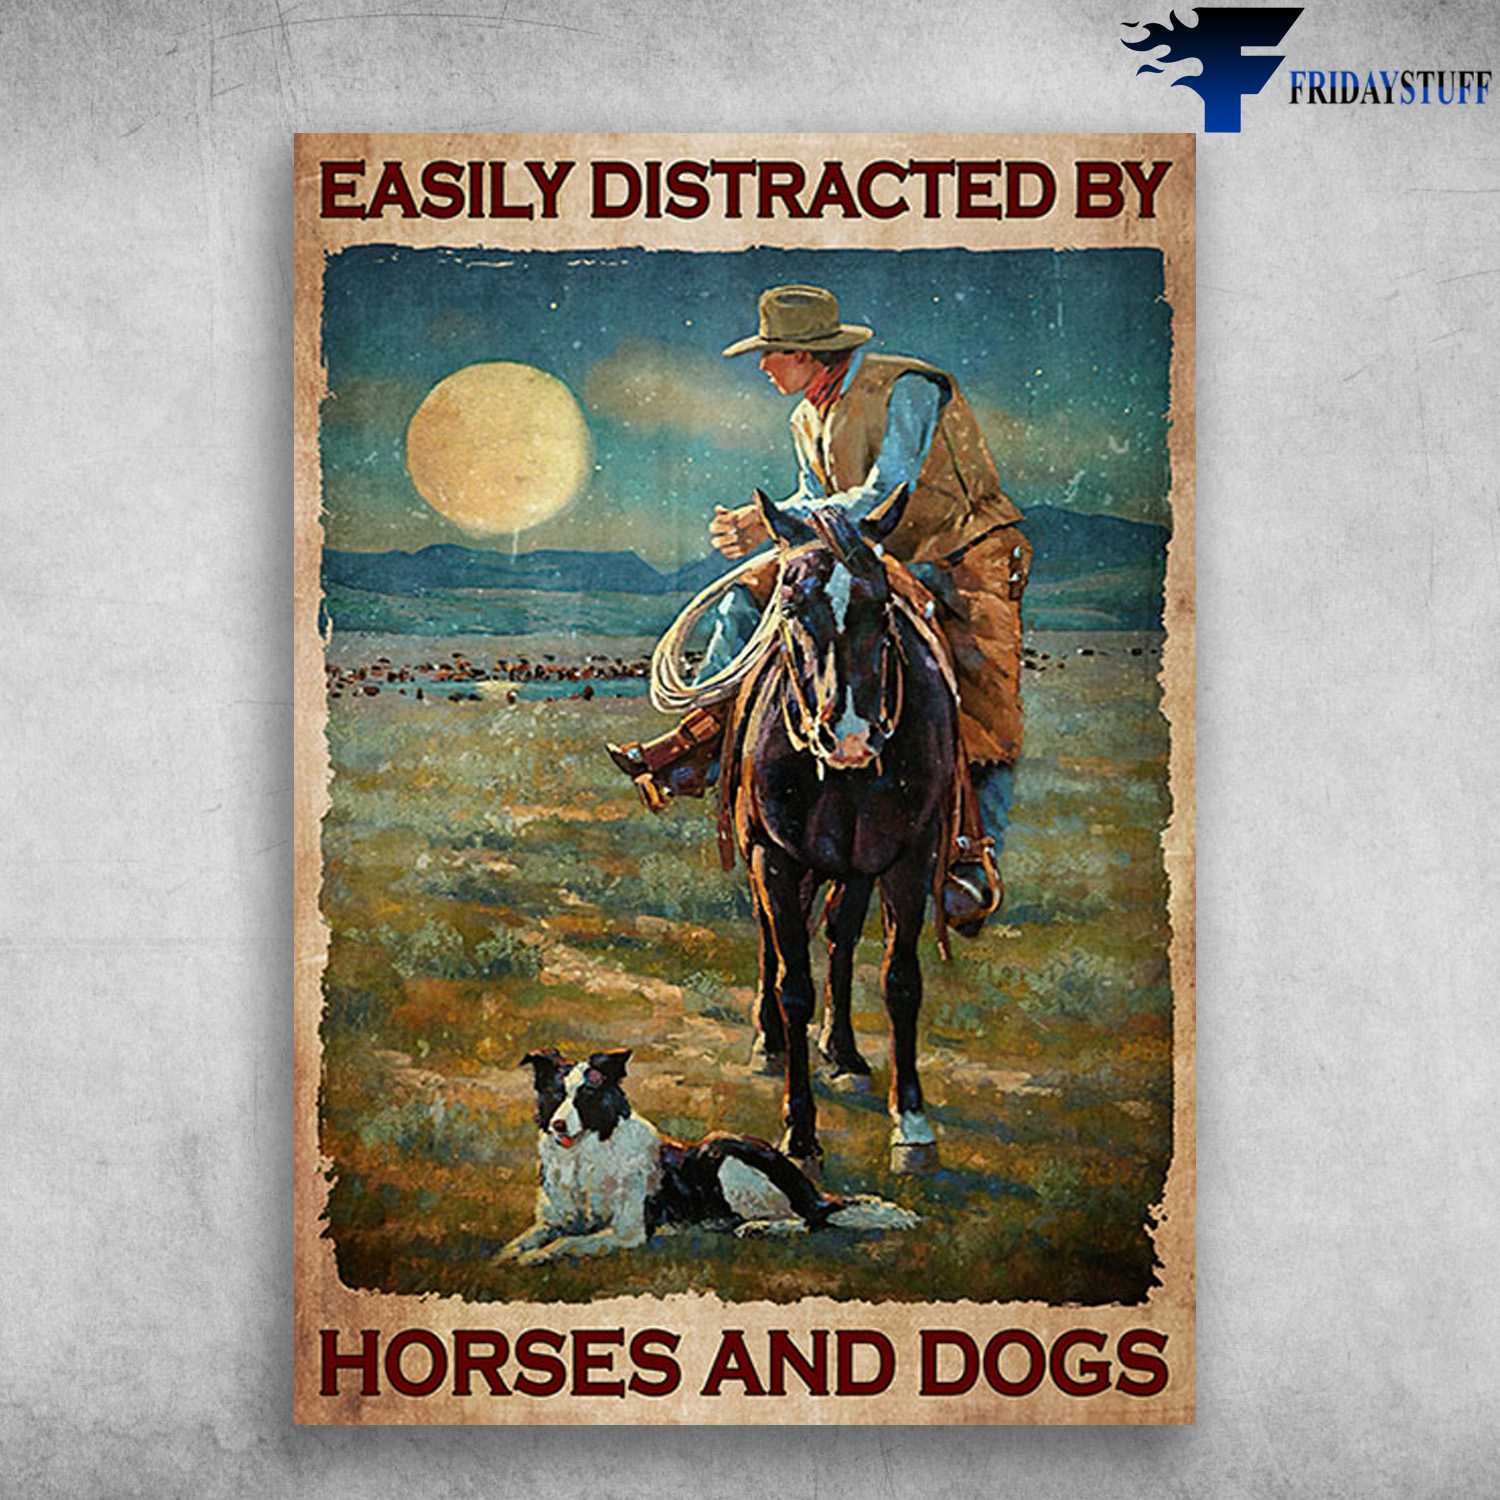 Border Collie Cowboy - Easily Distracted By, Horses And Dogs